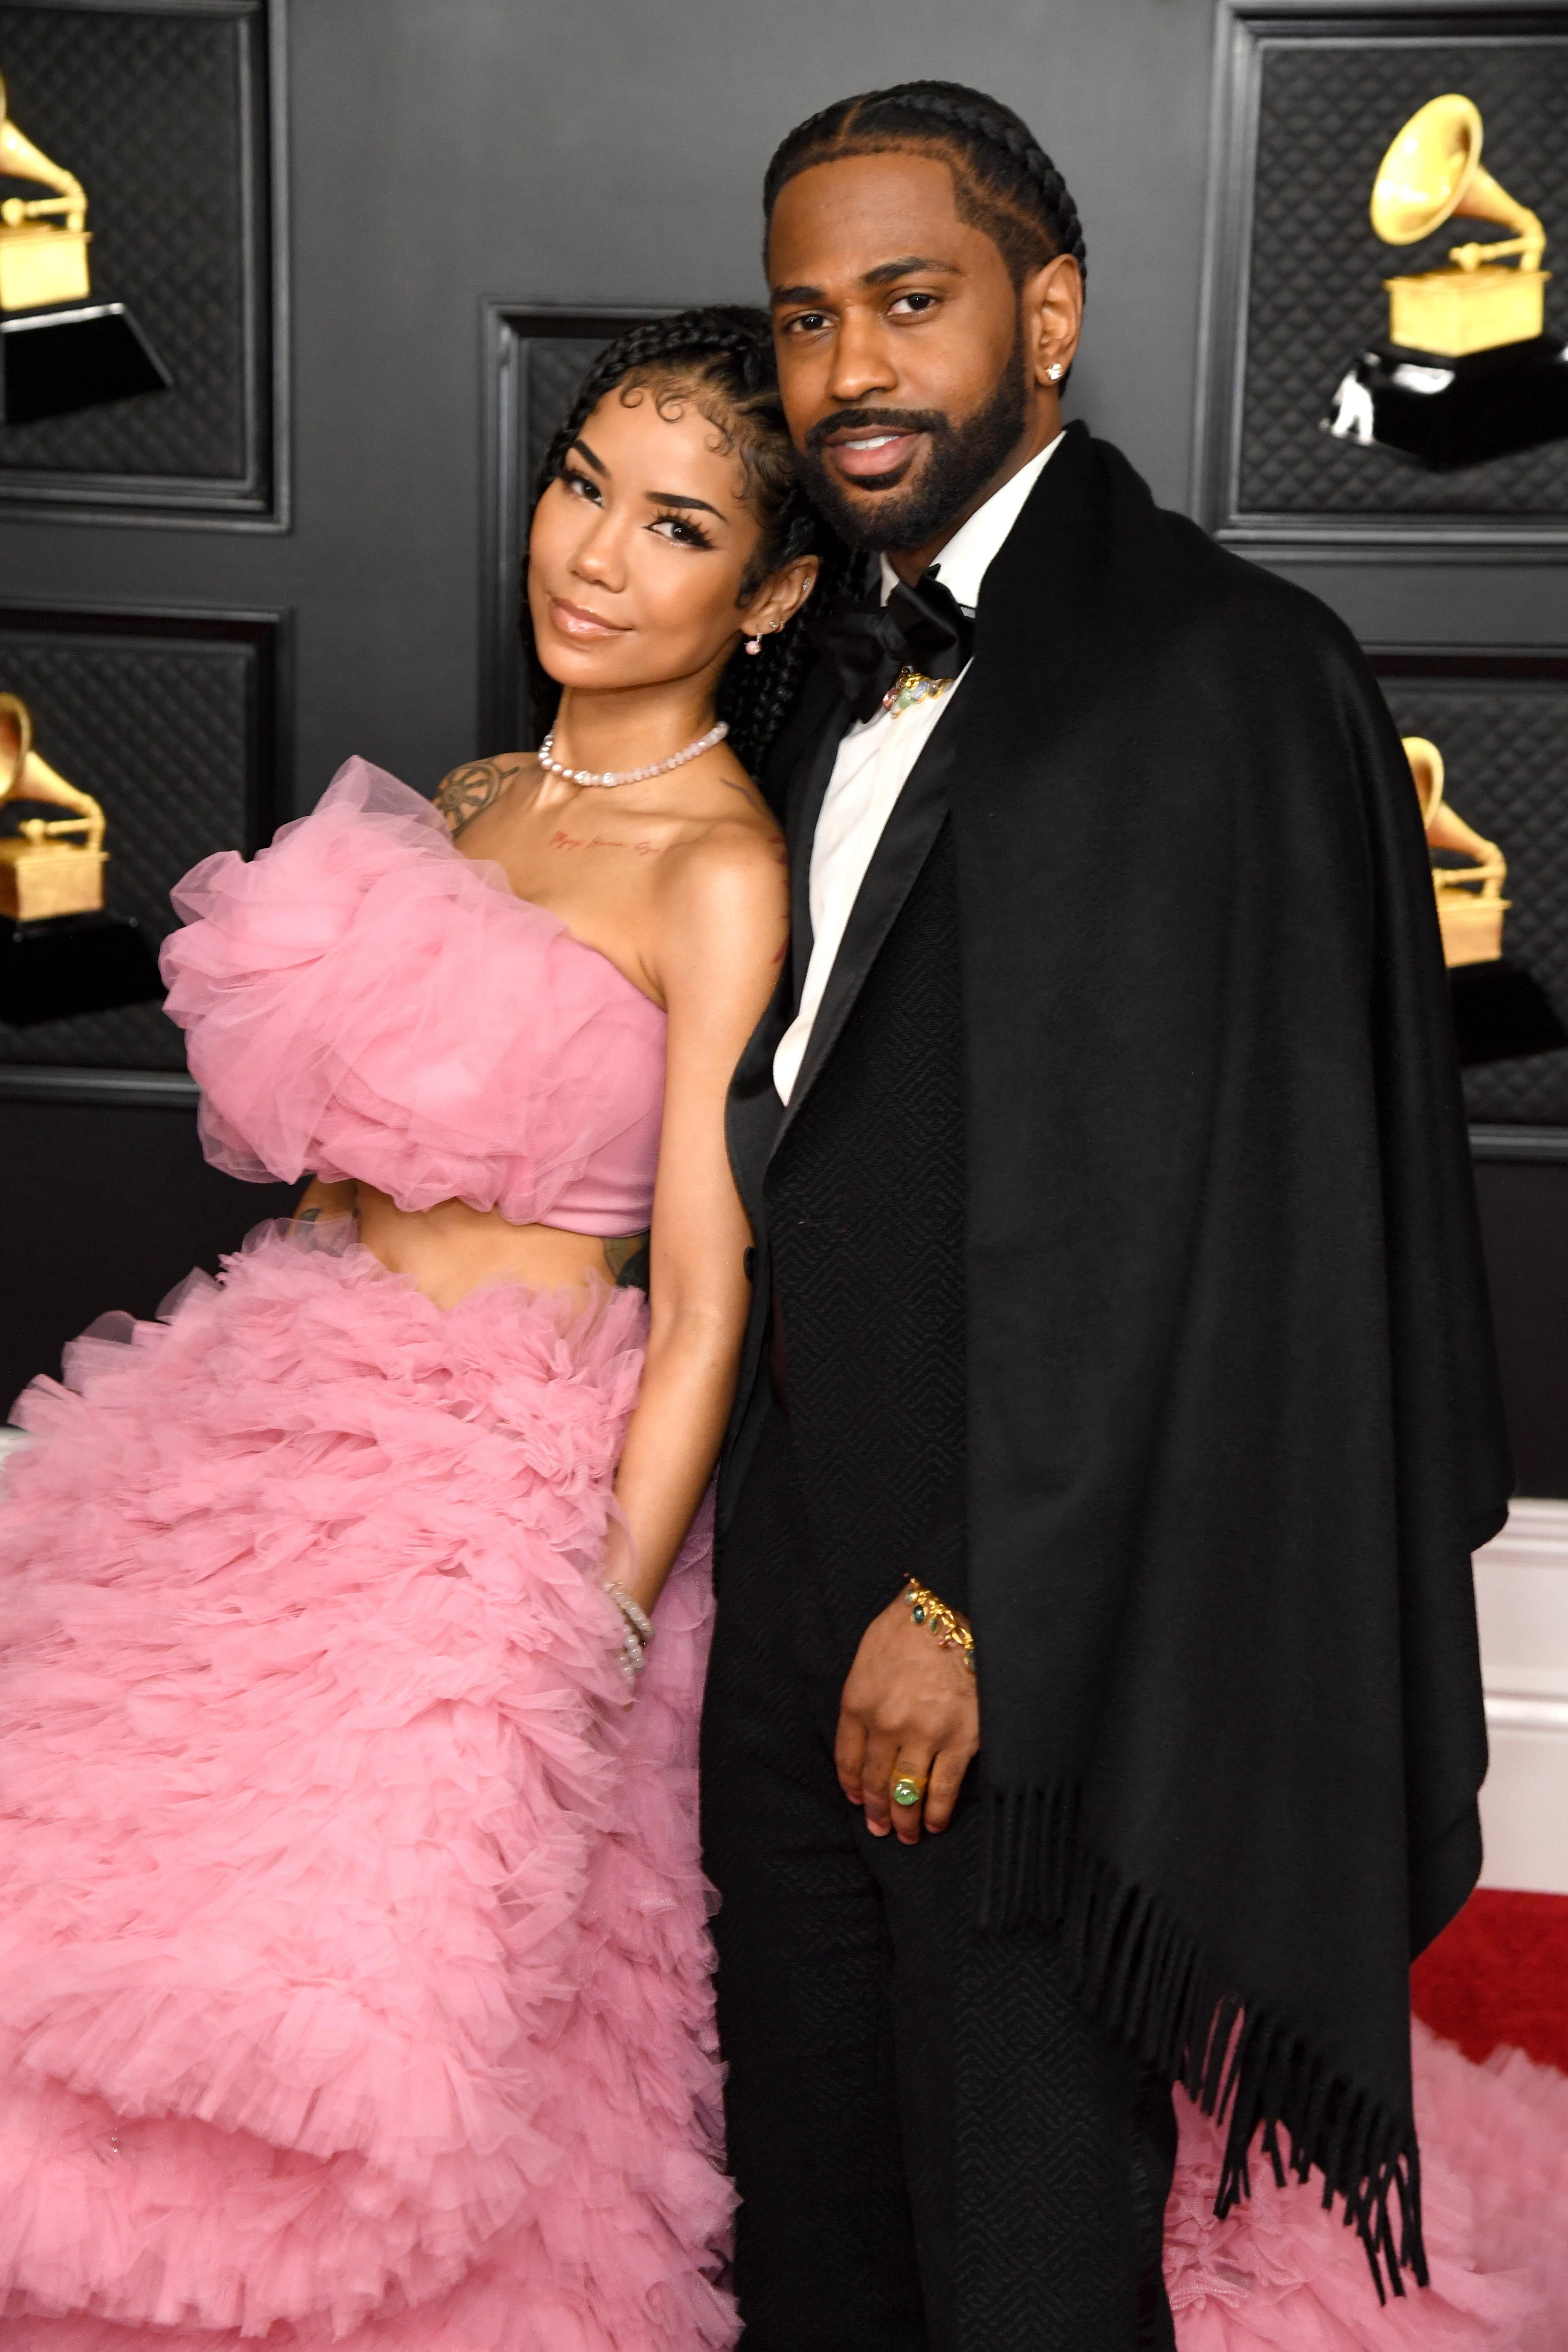 How long have Jhené Aiko and Big Sean been dating Relationship explored  amid pregnancy rumors